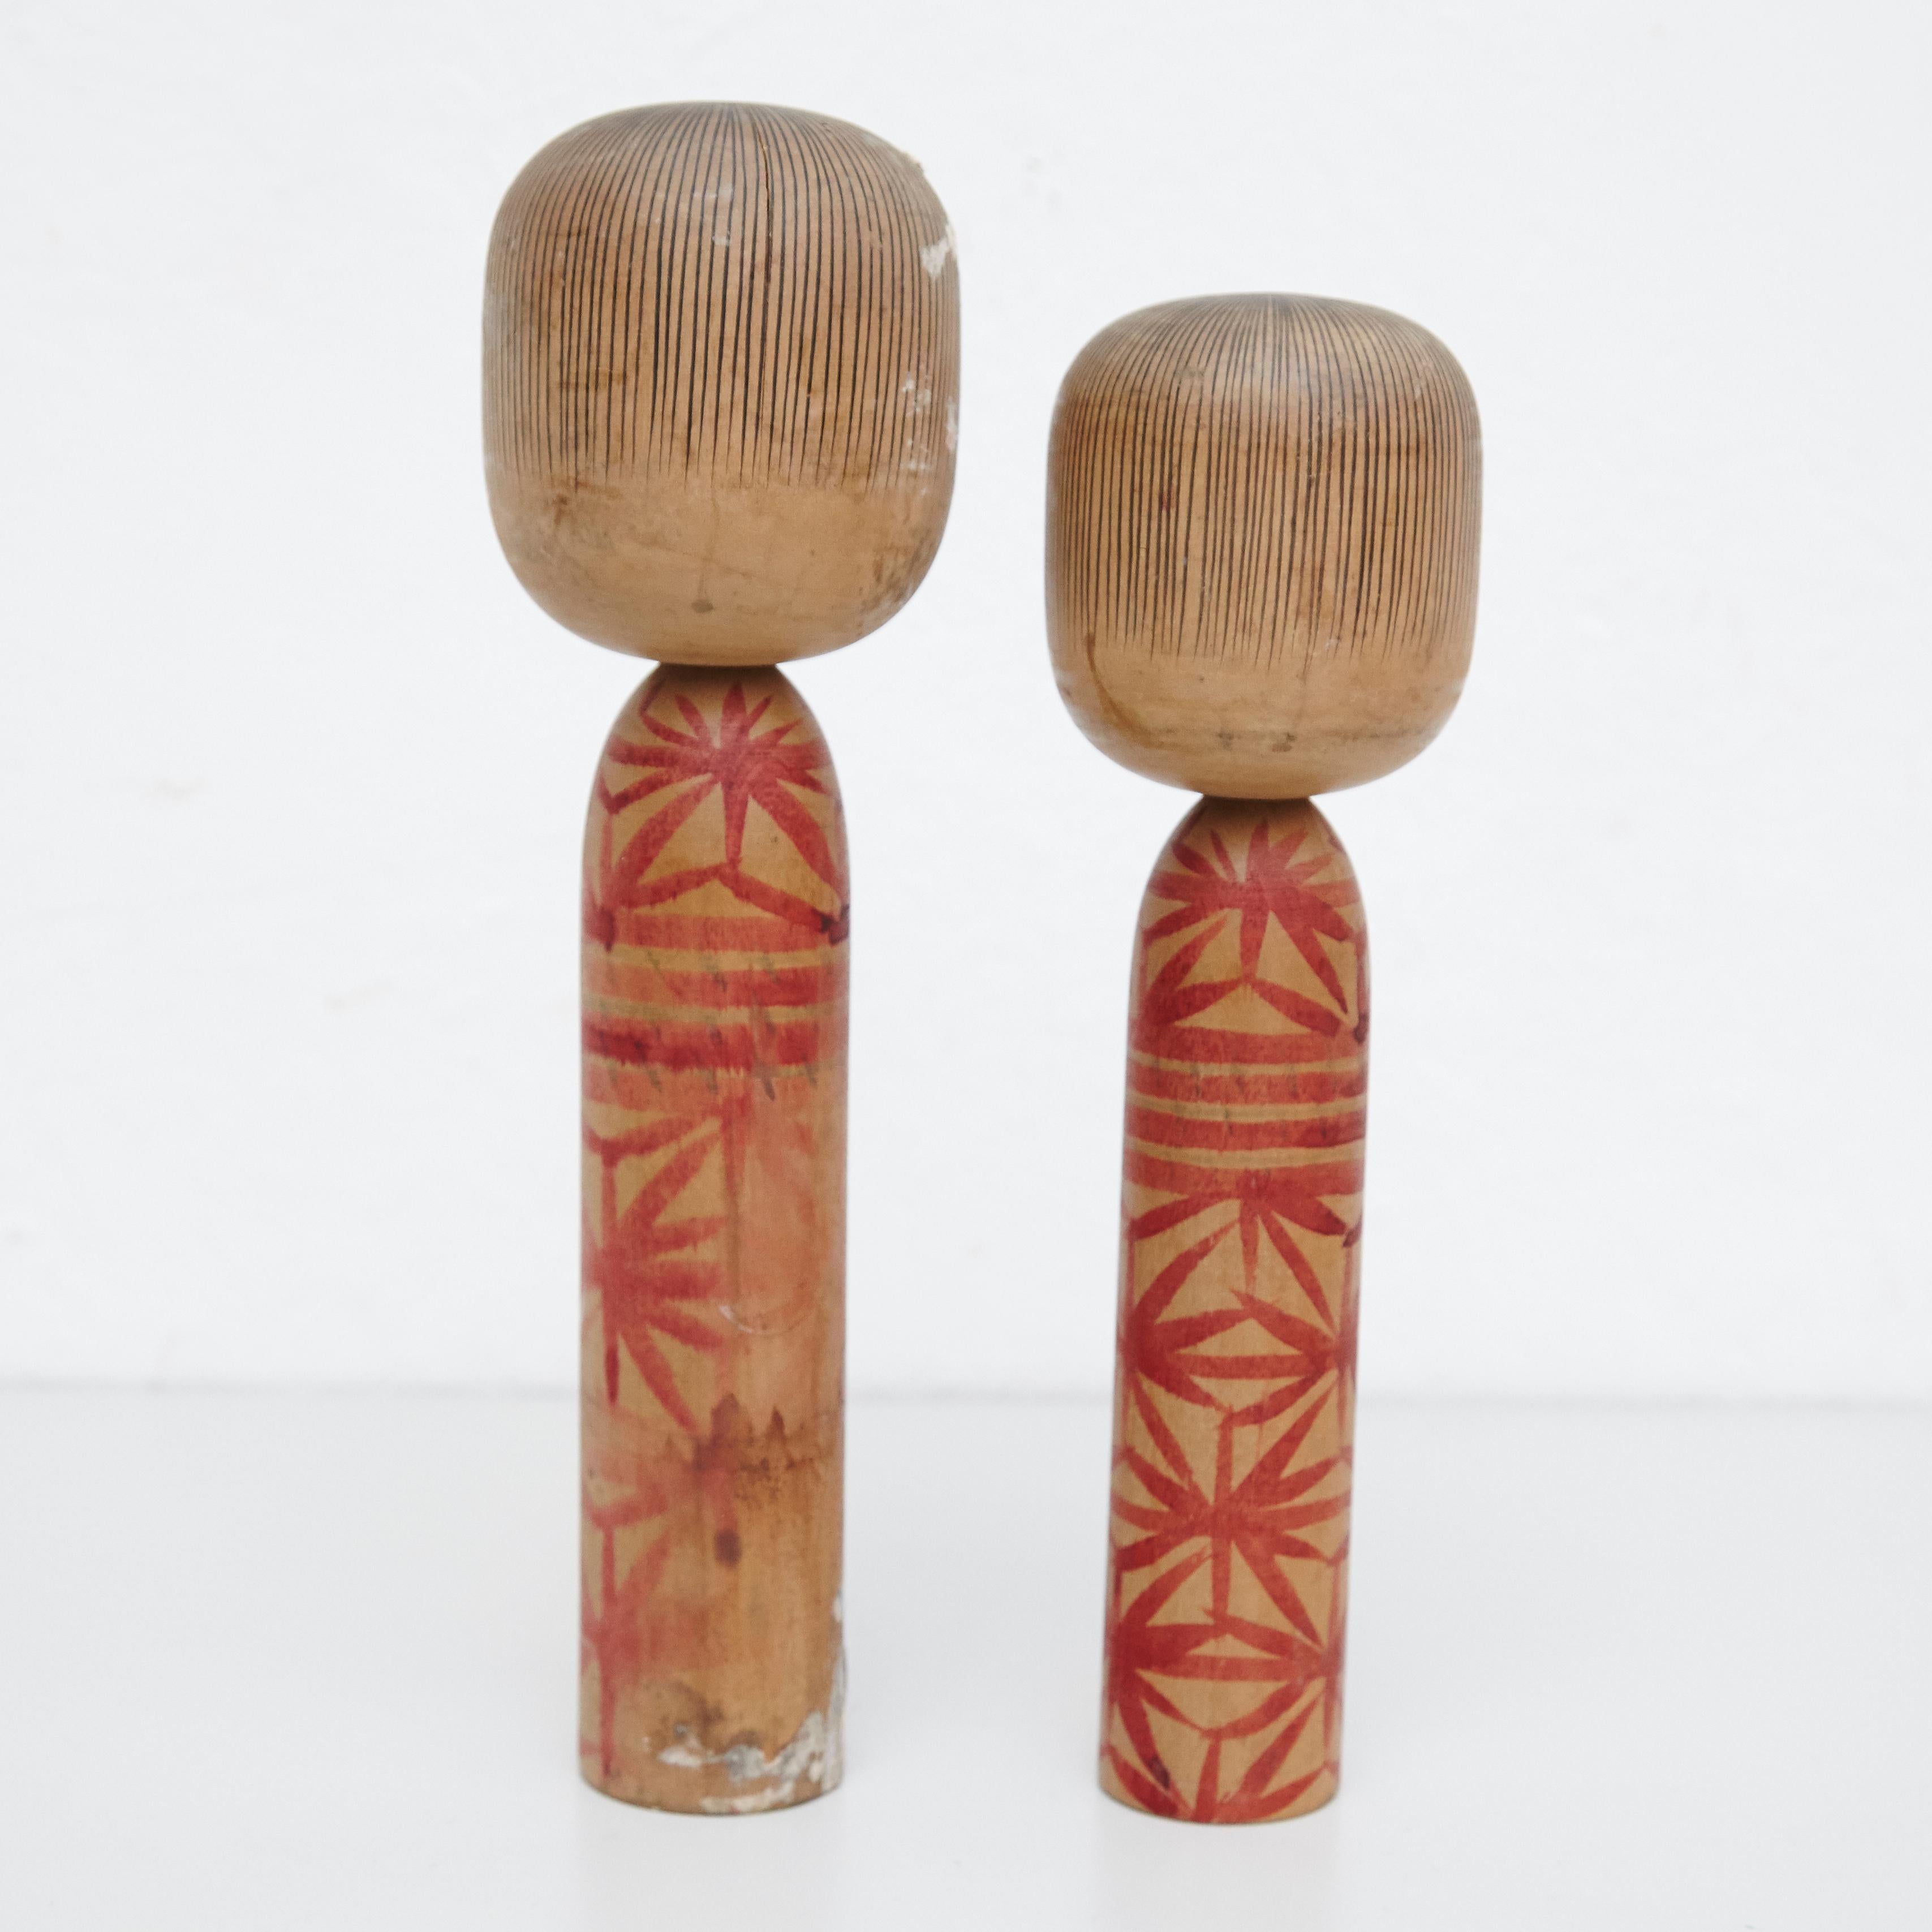 Japanese dolls called Kokeshi of the early 20th century.
Provenance from the northern Japan.
Set of 2.

Measures: 

30 x 8.5 cm
27 x 7.5 cm


Handmade by Japanese artisants from wood. Have a simple trunk as a body and an enlarged head. One